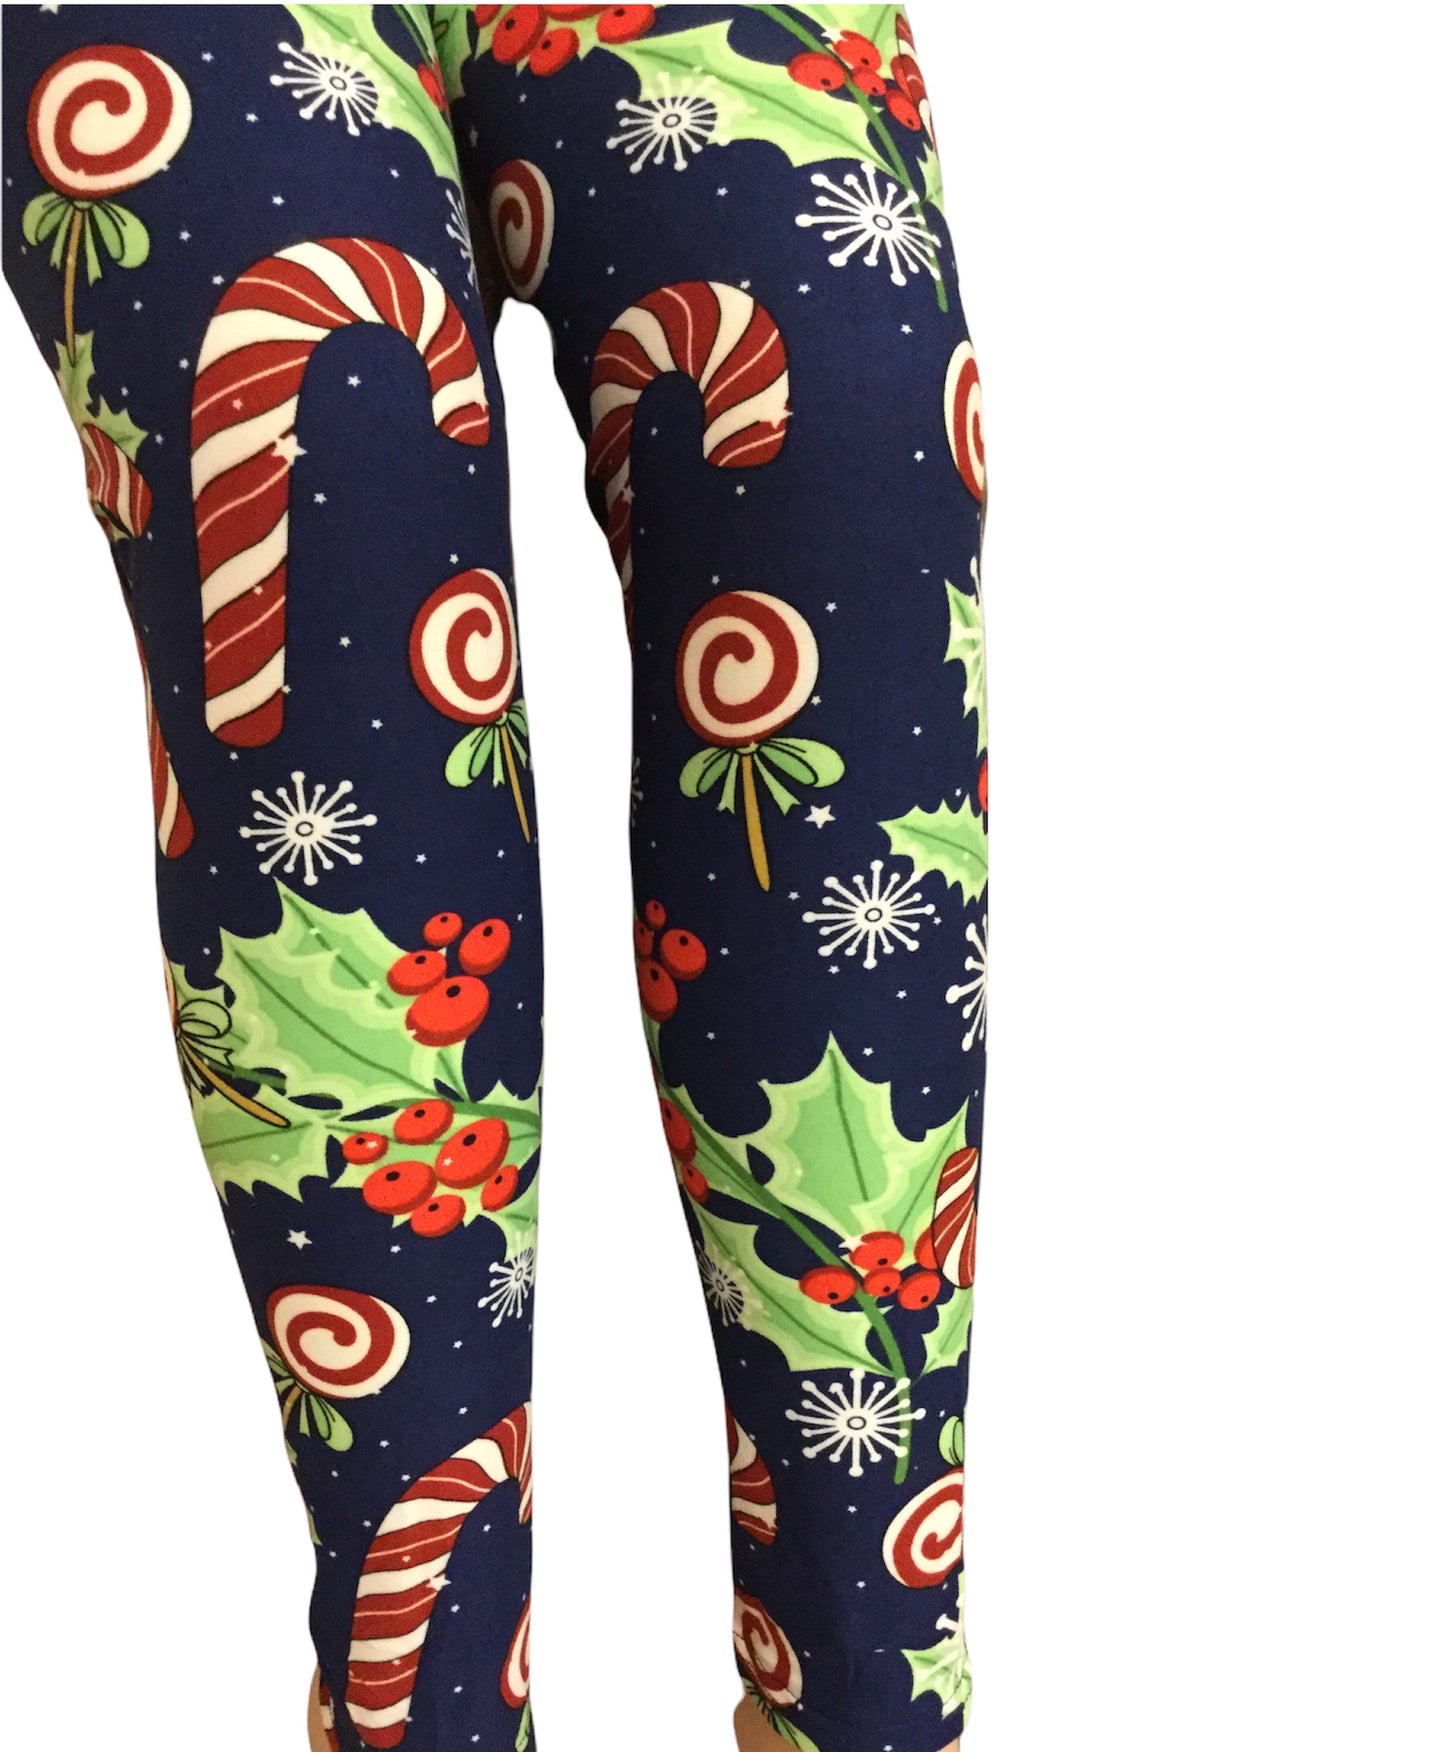 EXTRA PLUS Candy Cane Printed Leggings